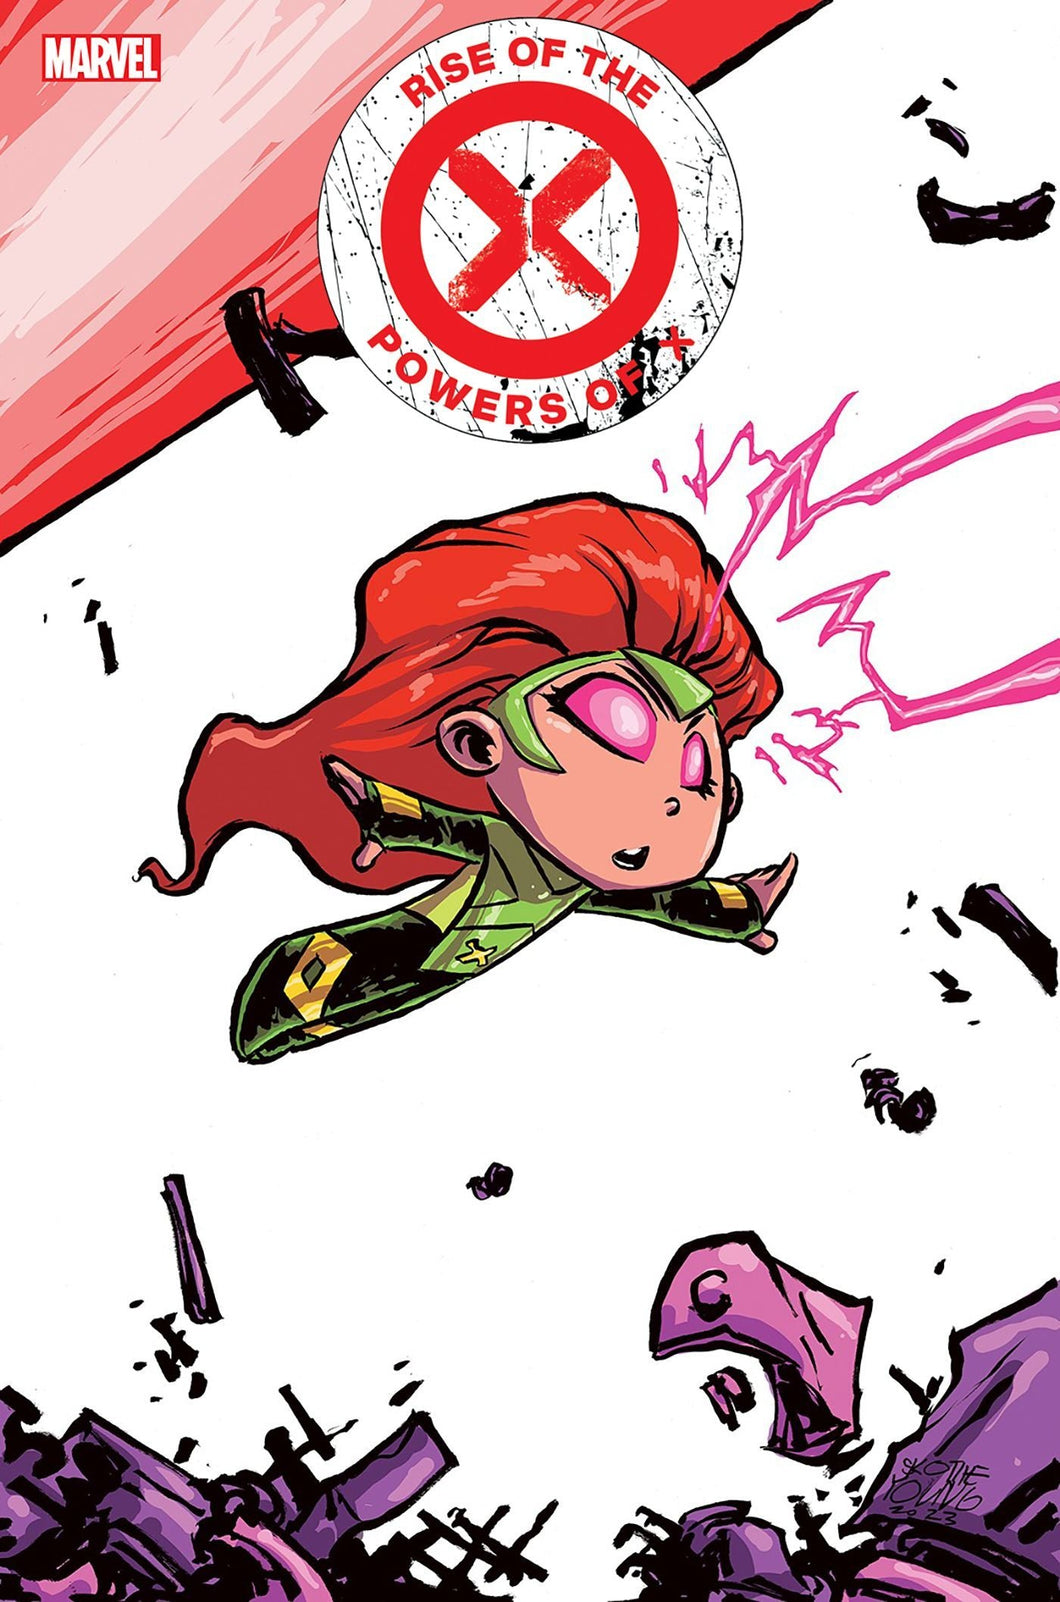 RISE OF THE POWERS OF X#1 (SKOTTIE YOUNG VARIANT)